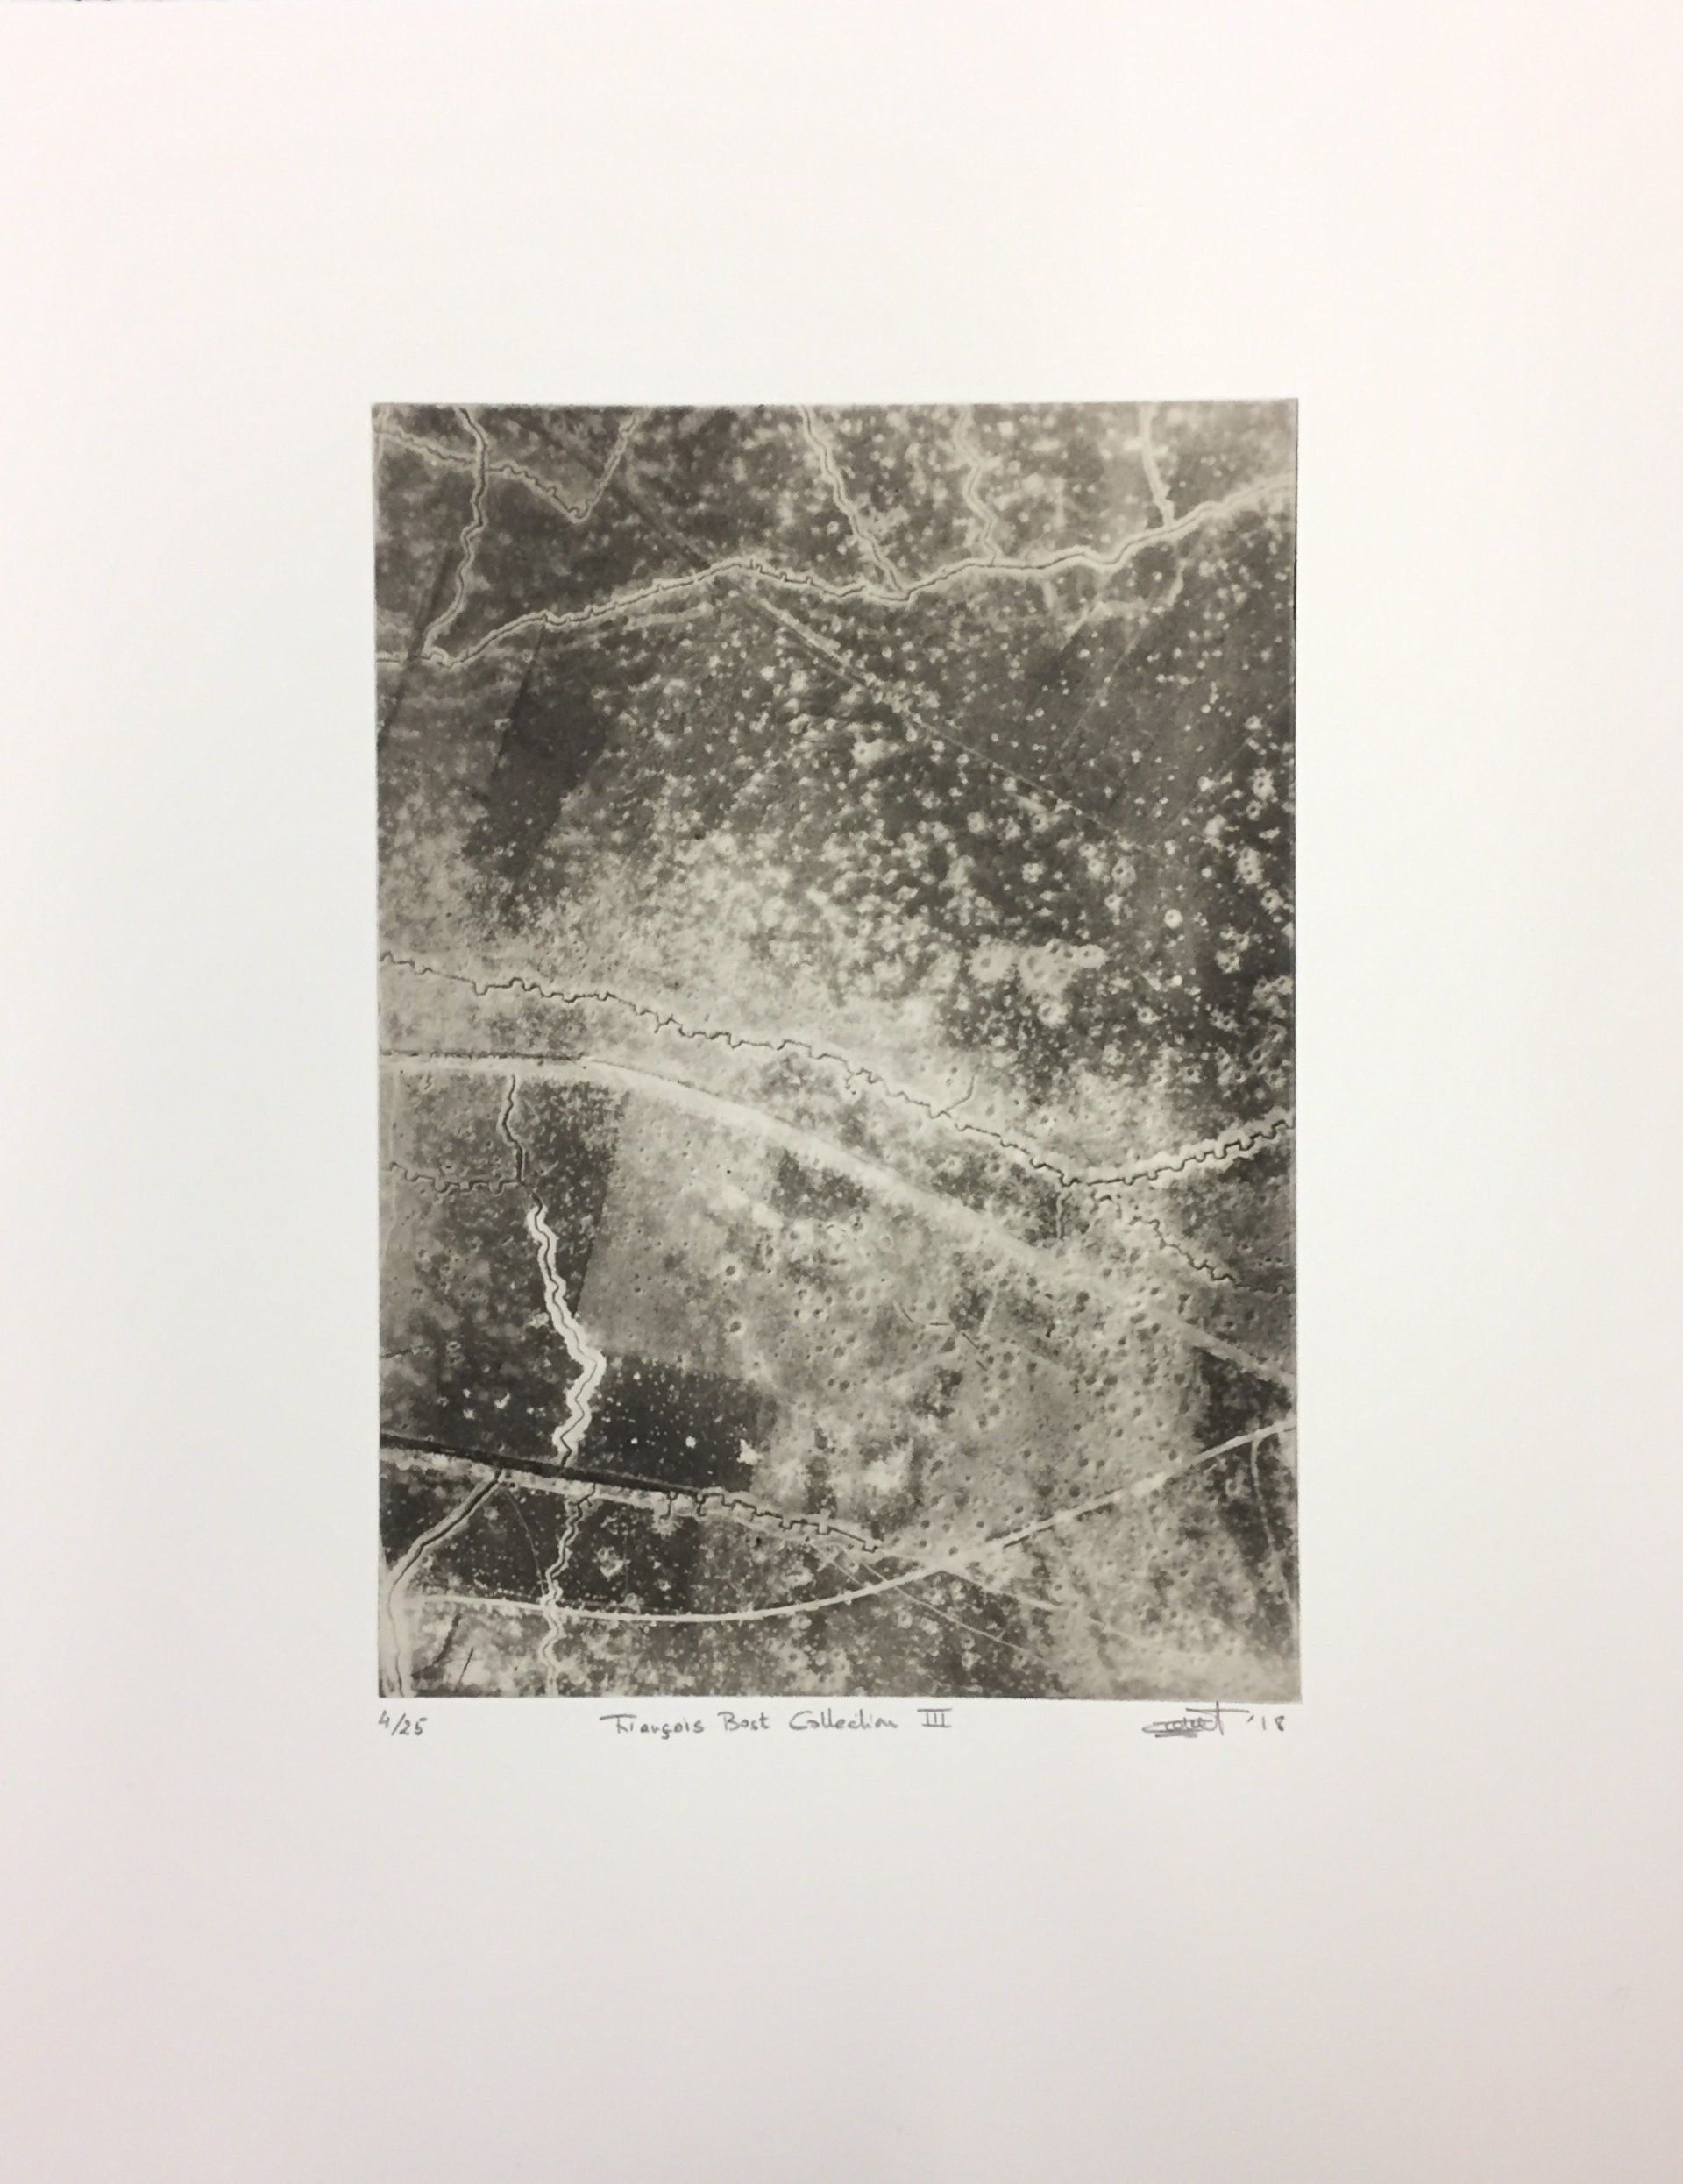 François Bost Collection 3, Barleux Cemetery, Intaglio by Robert Russell, Olivier Cornet Gallery